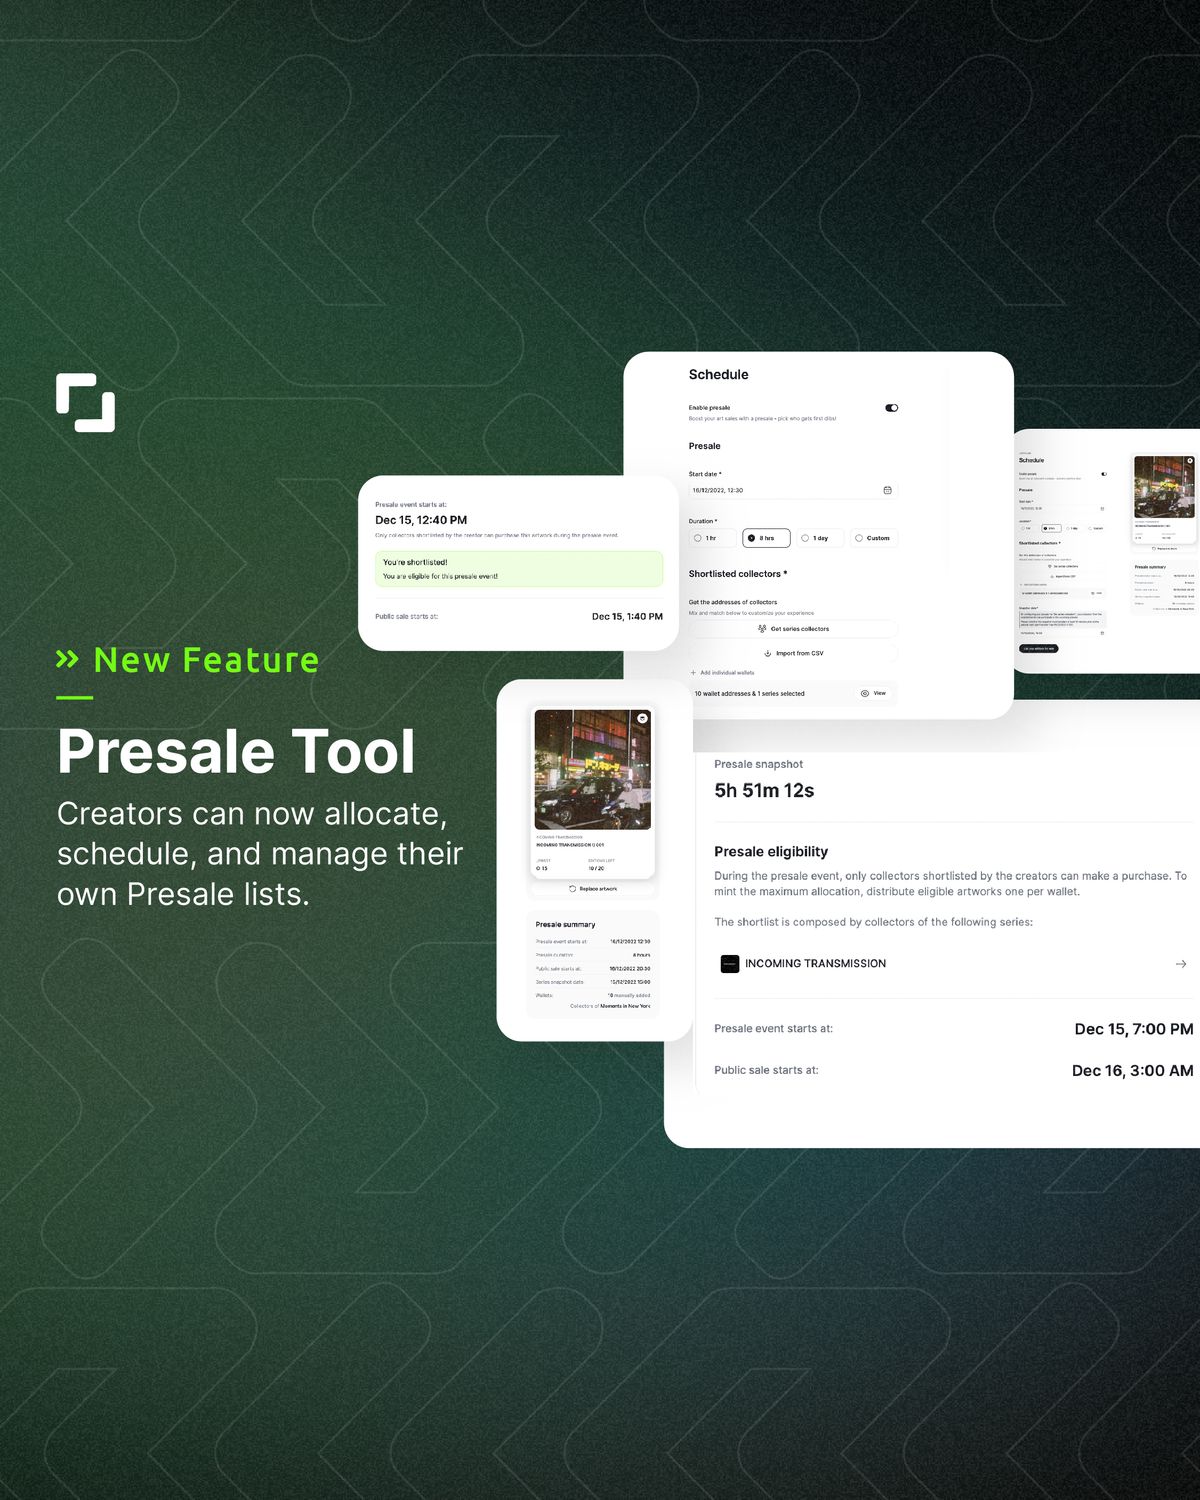 Introducing our new Presale Tool